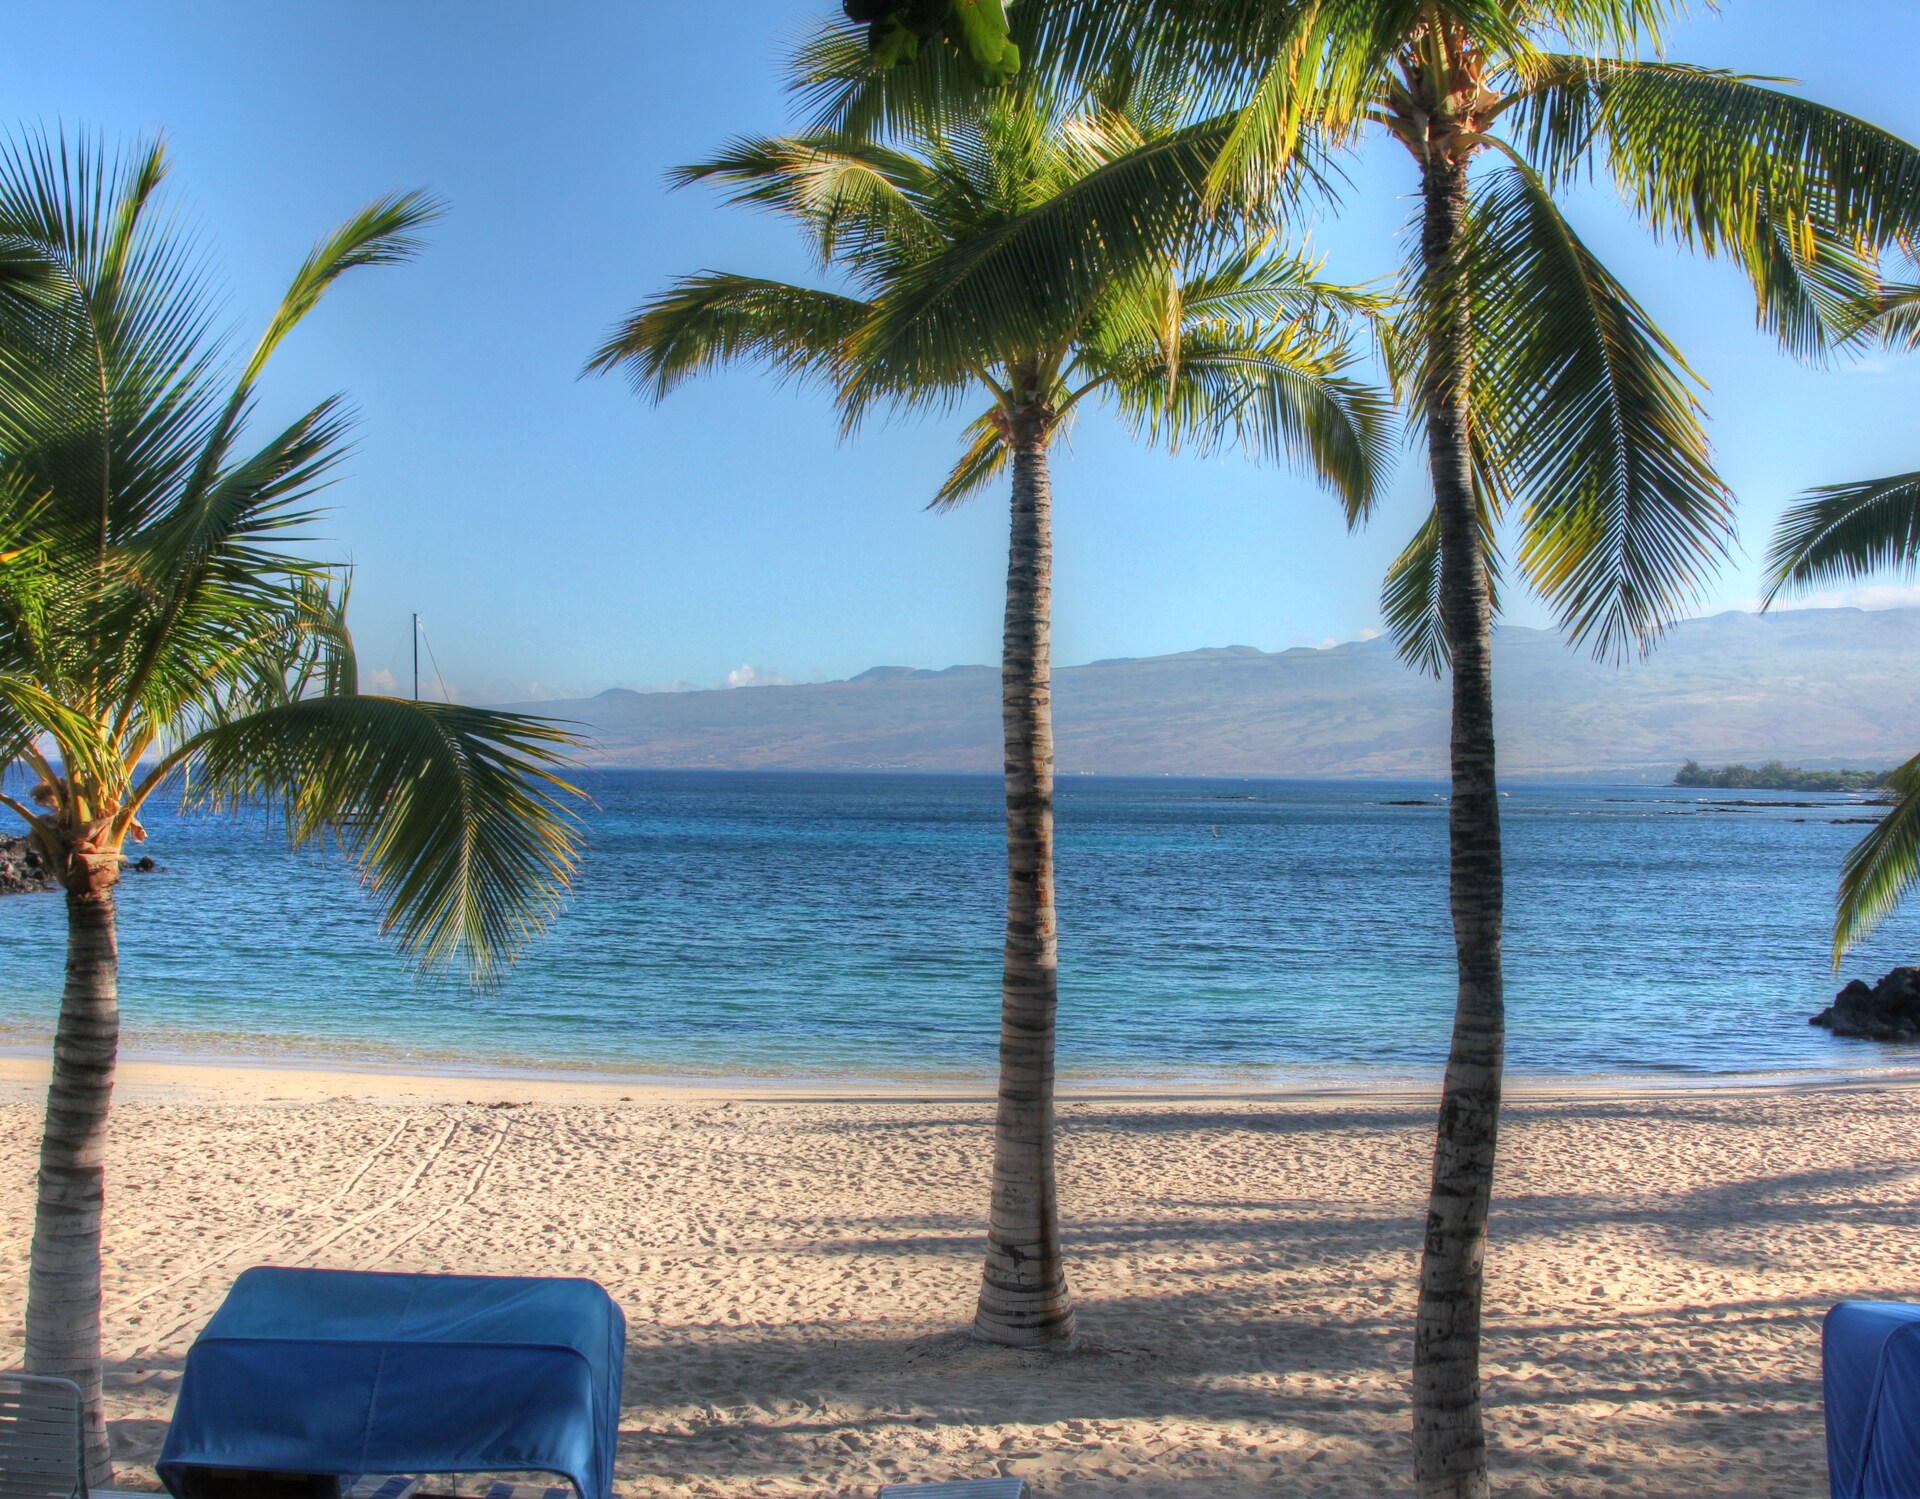 Access Pass to the Private Mauna Lani Beach Club included for your stay!